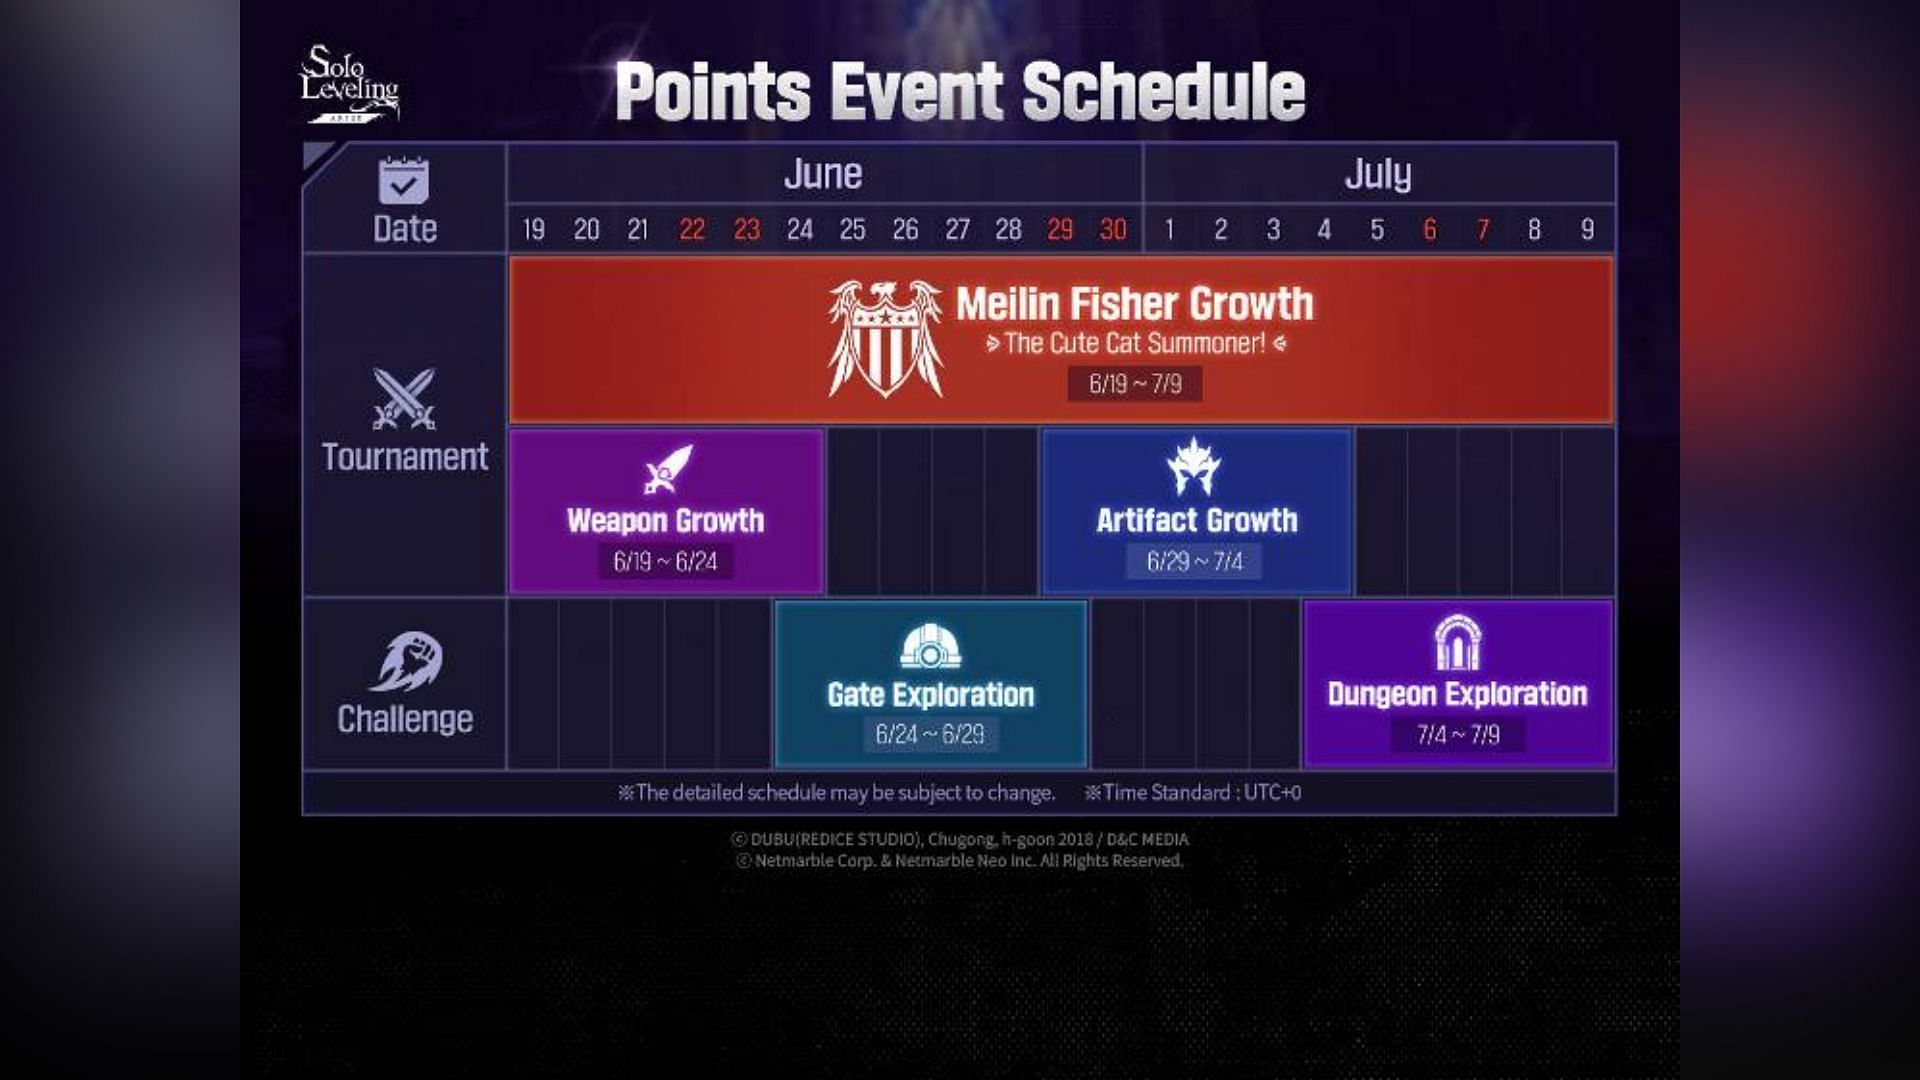 Schedule of Points Event in Solo Leveling Arise (Image via Netmarble)